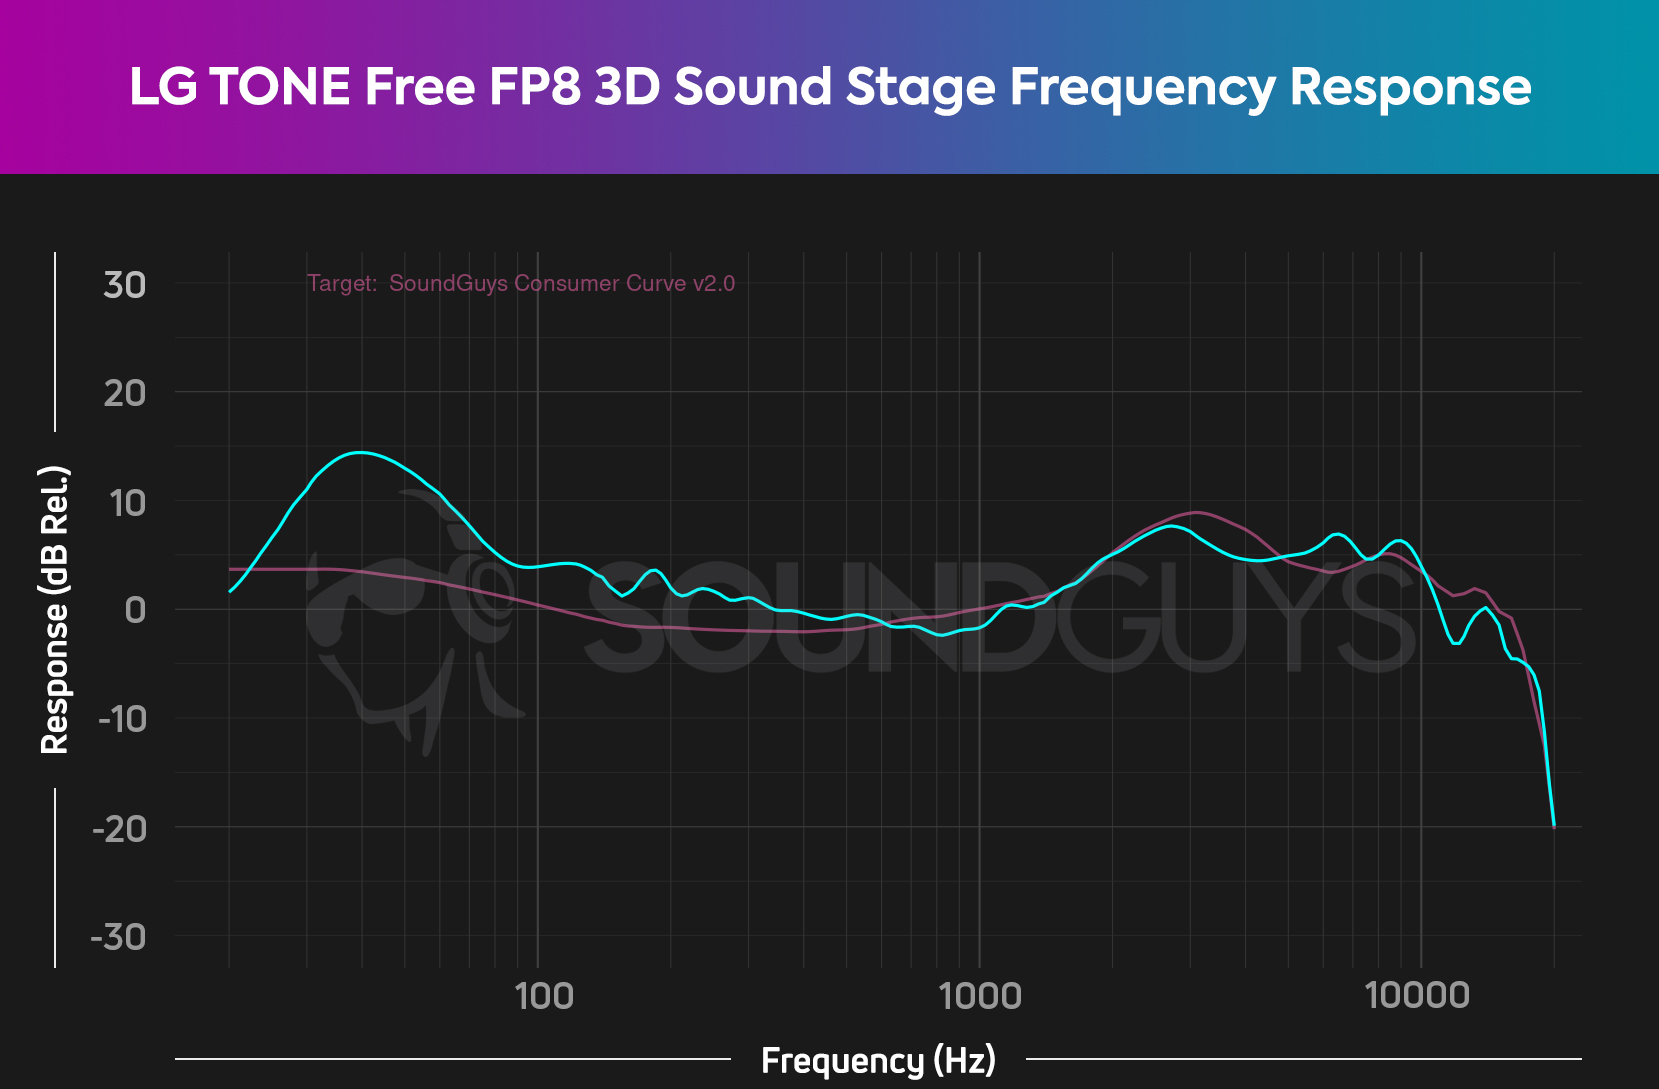 Frequency response graph of 3D Surround Stage EQ setting measured against SoundGuys house curve.